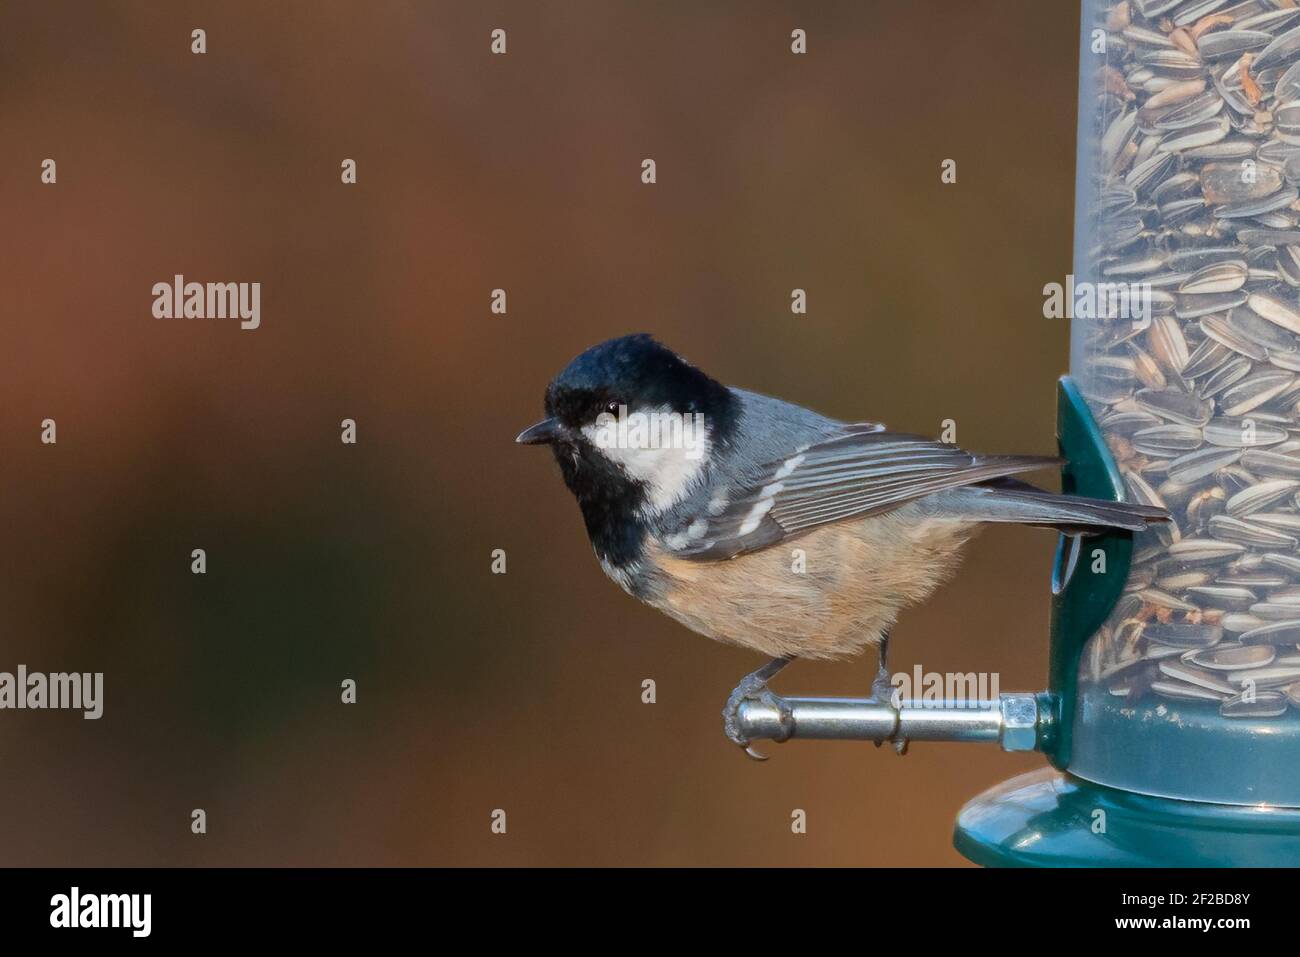 Coal Tit (Periparus ater) Eating from a Bird Feeder Stock Photo